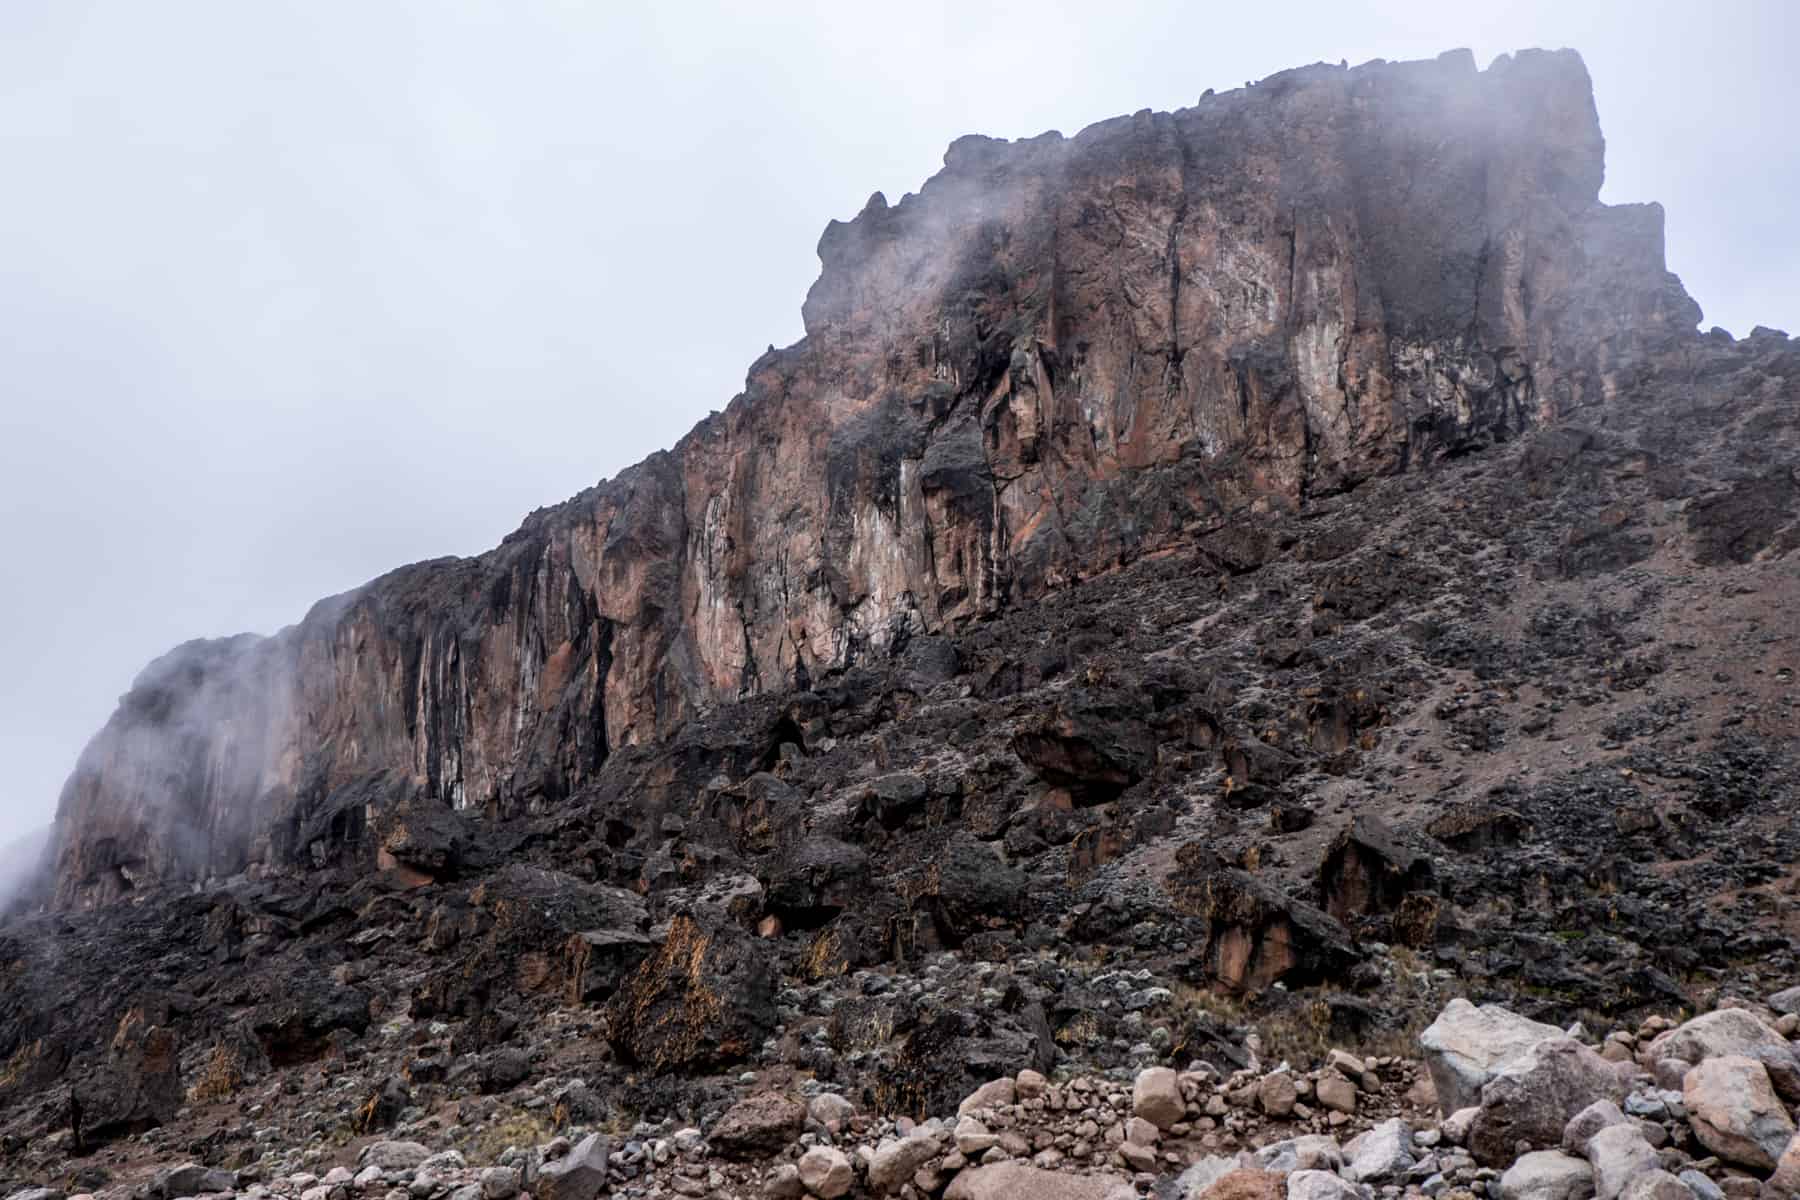 The burnt orange and black rectangular rock known as the Lava Tower, seen on the Kilimanjaro climb